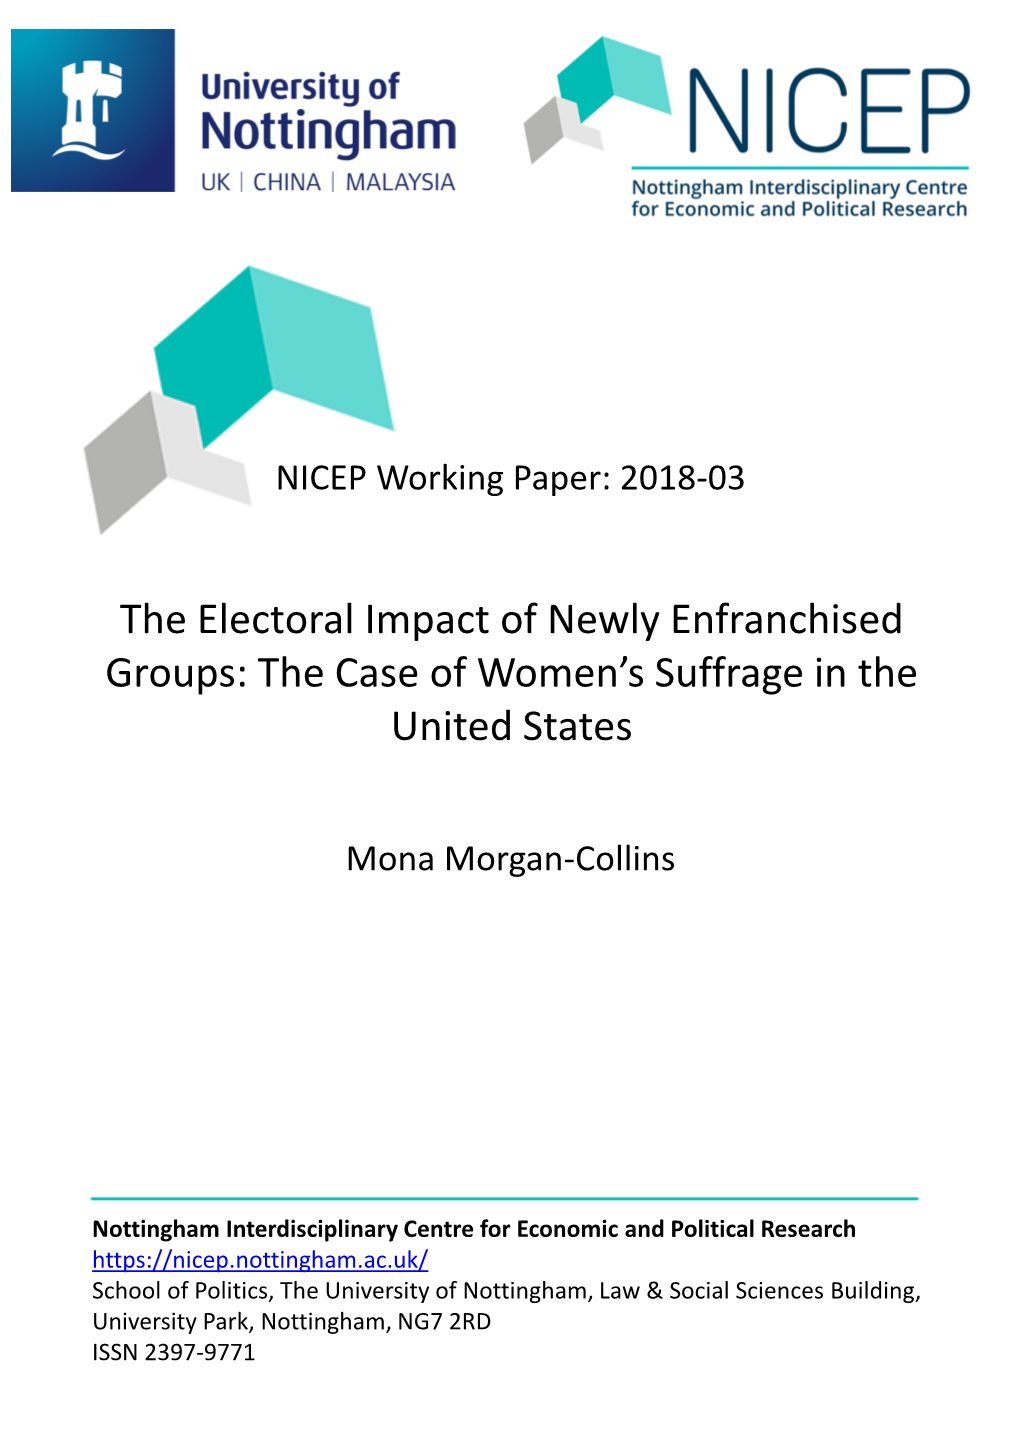 The Electoral Impact of Newly Enfranchised Groups: the Case of Women's Suffrage in the United States